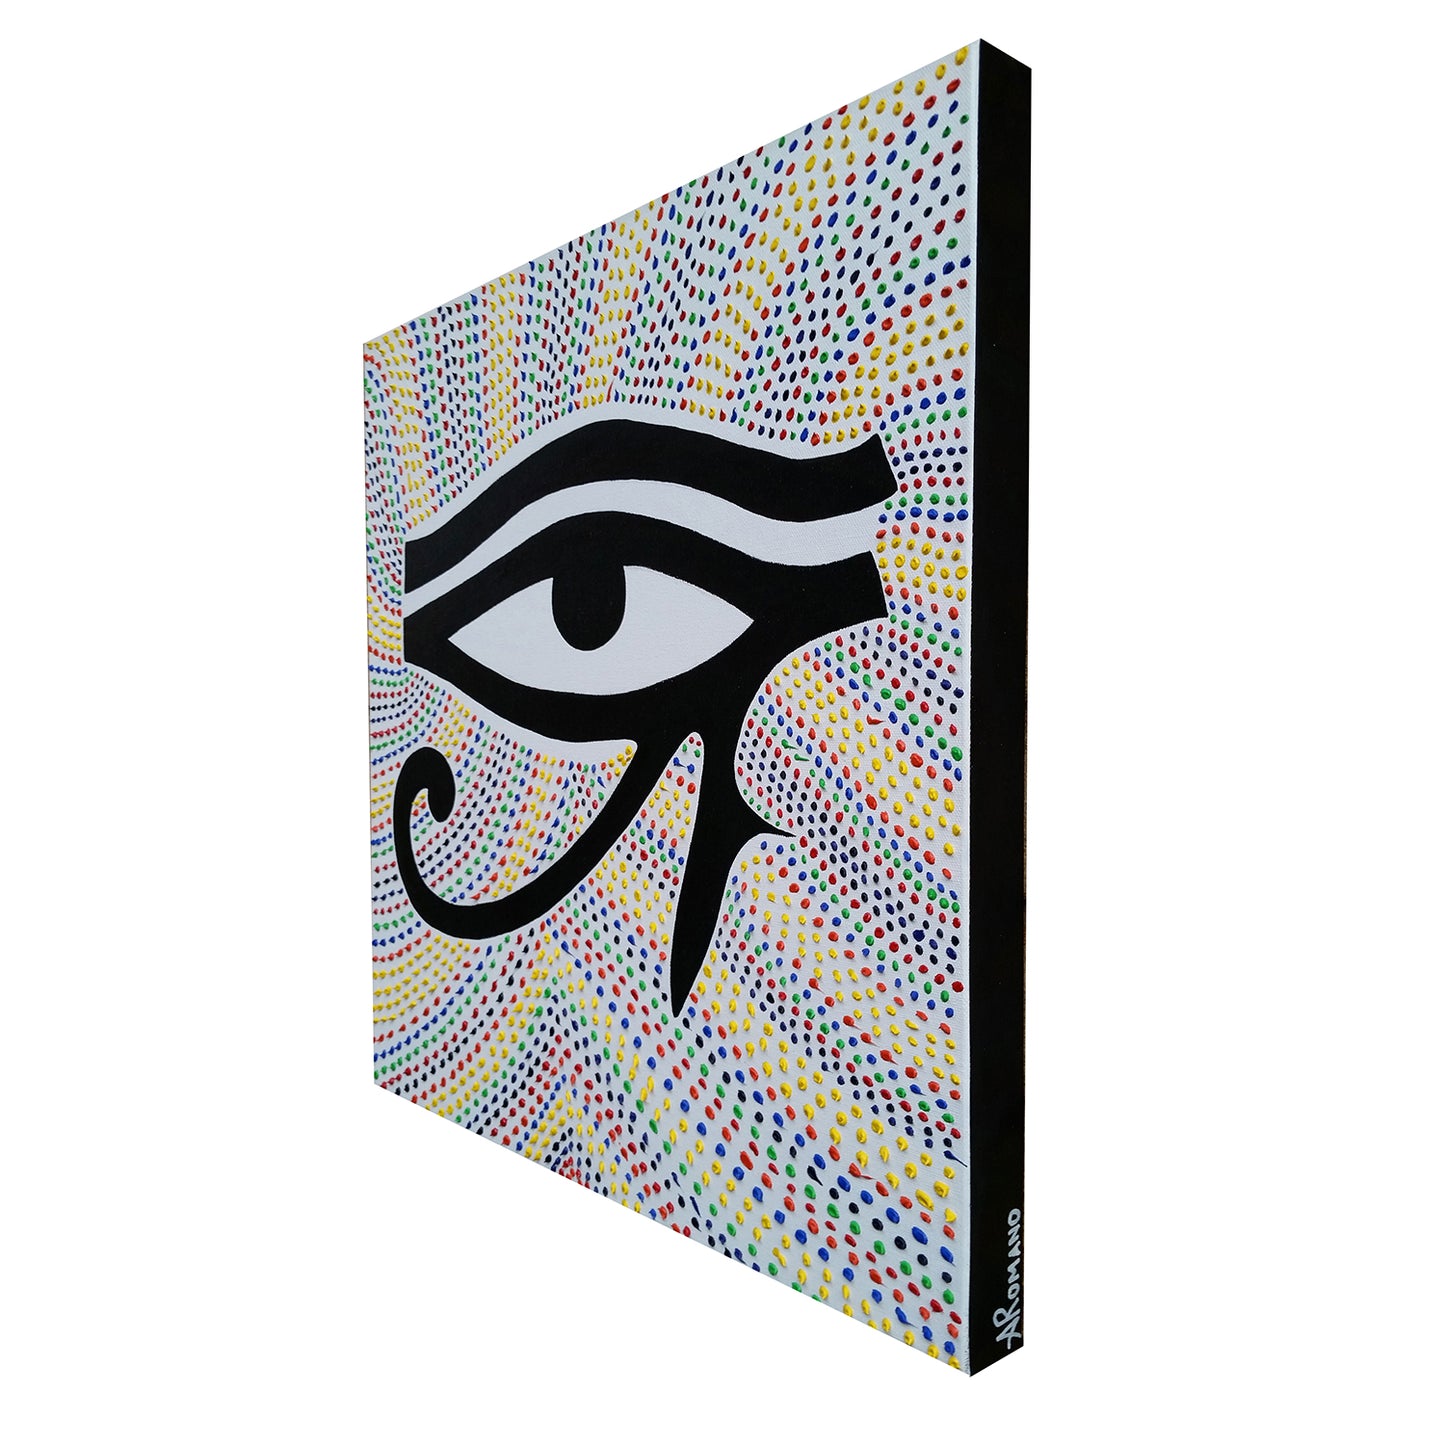 Third-Eye-Abstract-Expressionism-Art-Contemporary-Modern-Painting-Eye-of-Horus-Egyptian-Motif-Symbol-Acrylic-Canvas-Paintings